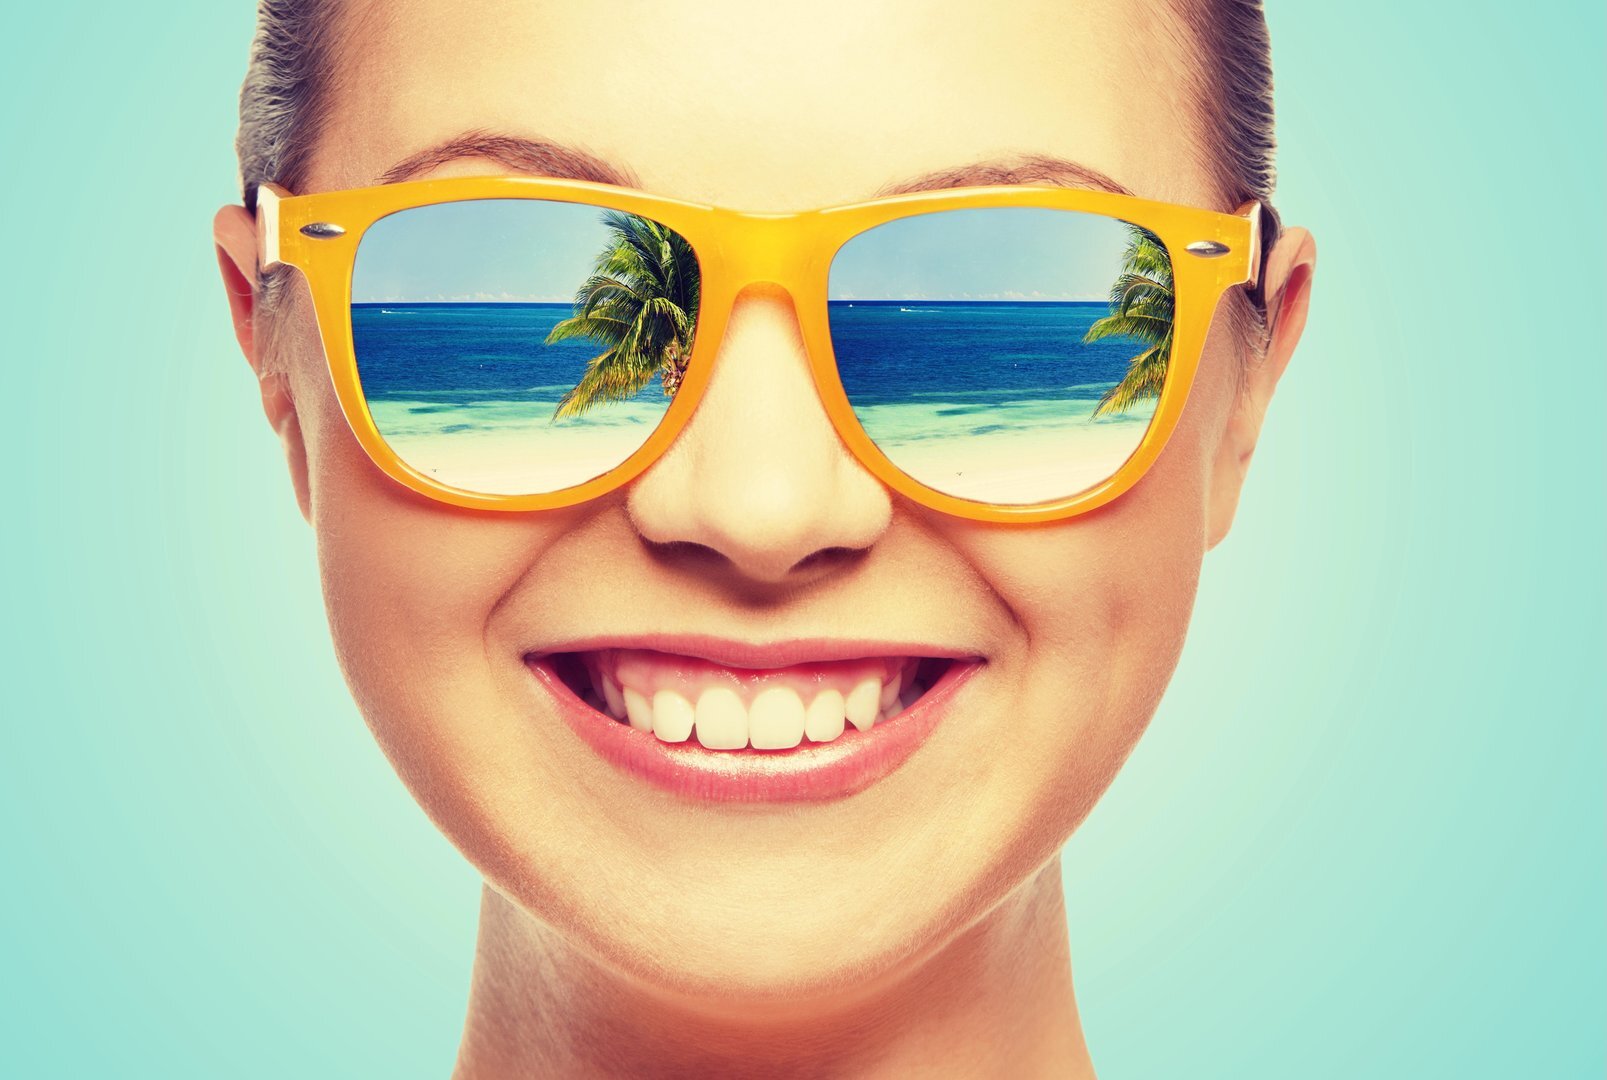 Protect your eyes from summer’s dangers